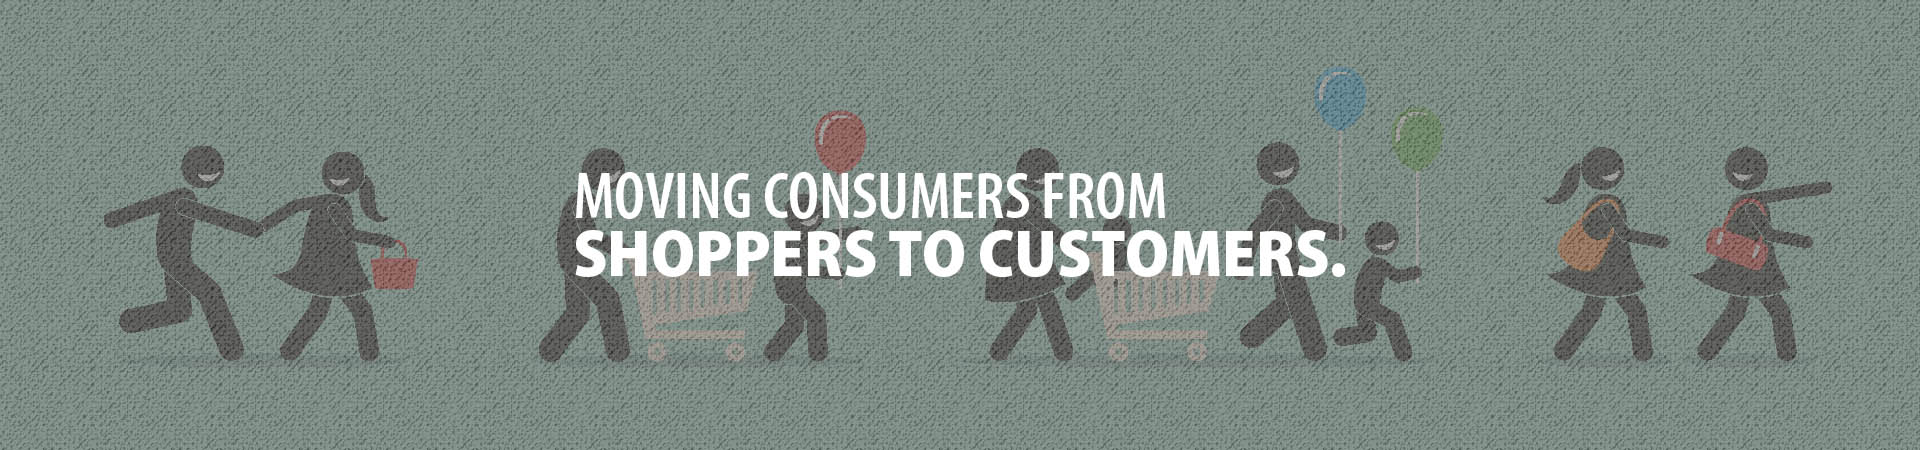 Moving consumers from shoppers to customers.